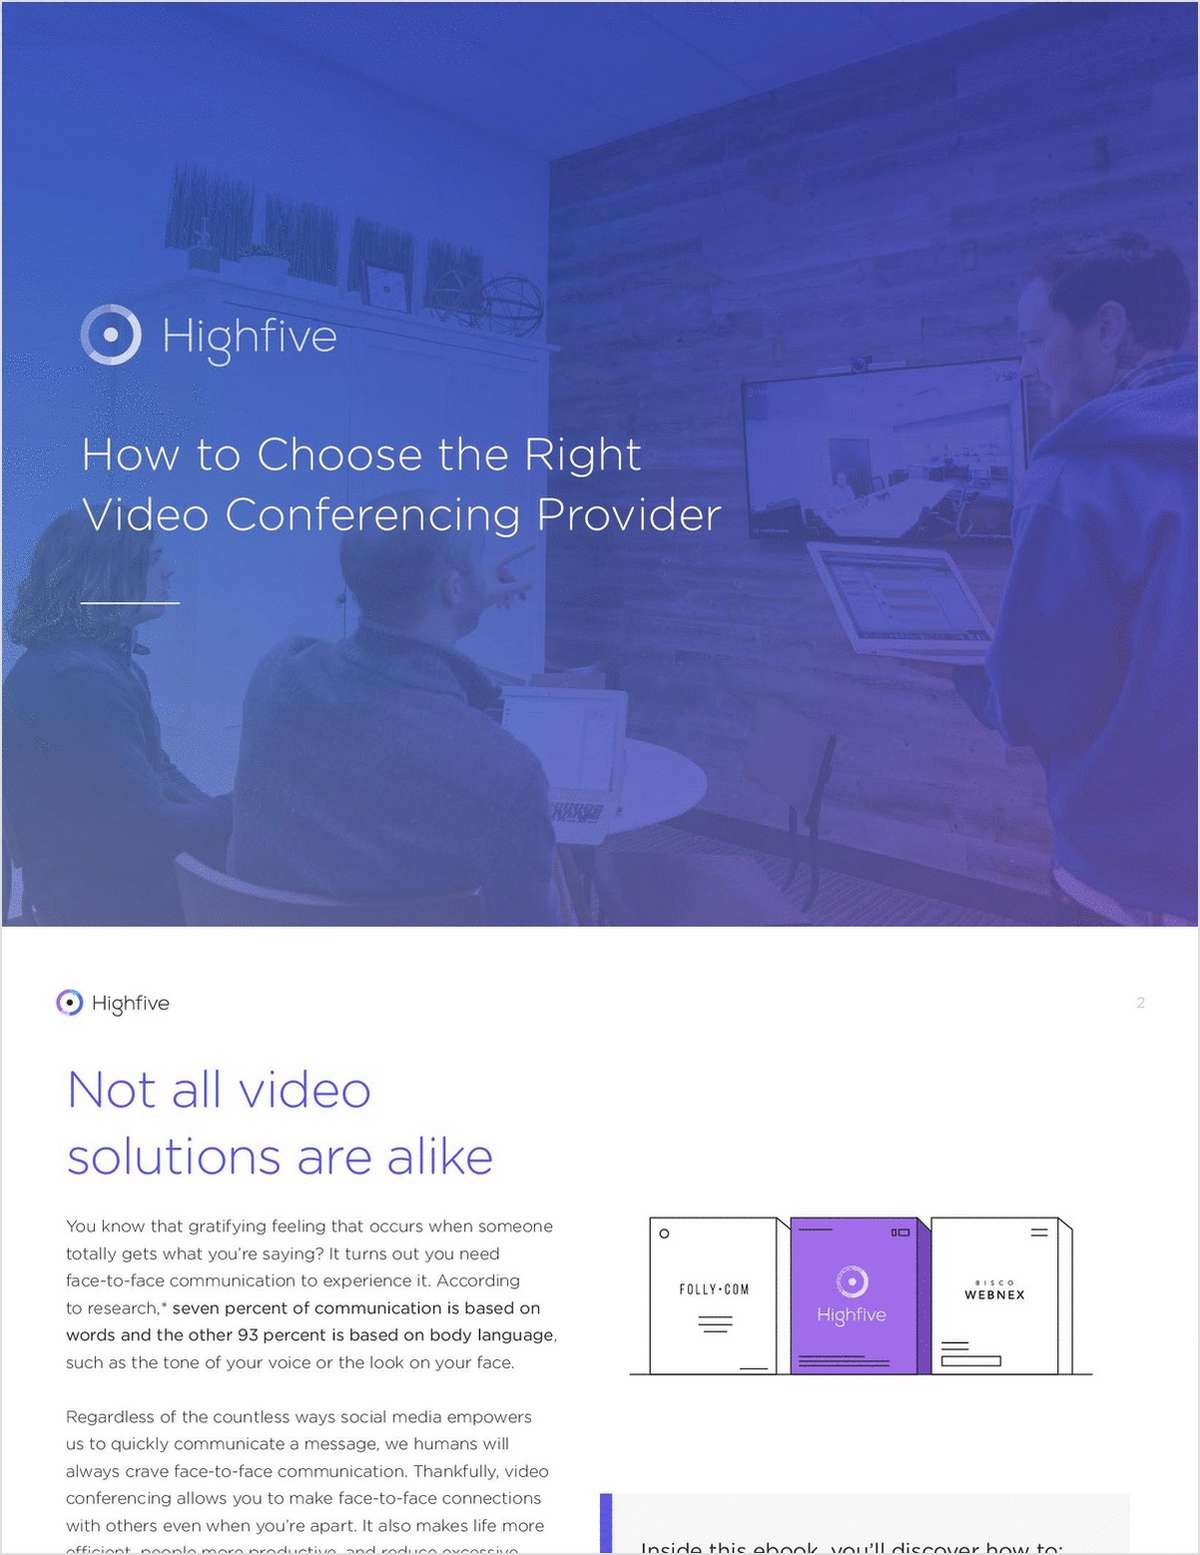 How to Choose the Right Video Conferencing Provider